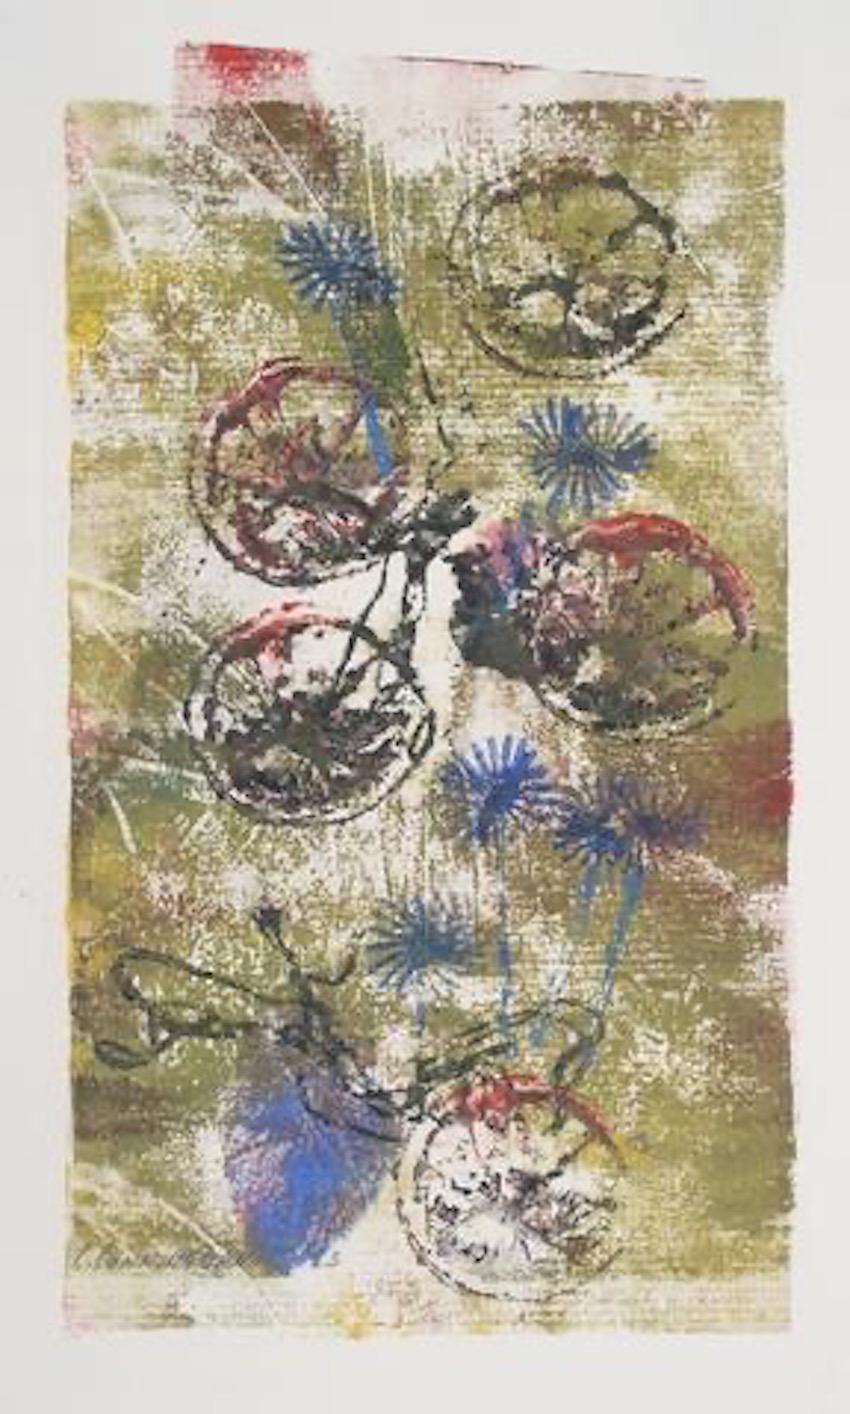 Carol Cunningham Still-Life Print - "Roundelay" 1964 Monotype of Abstracted Bicycles 